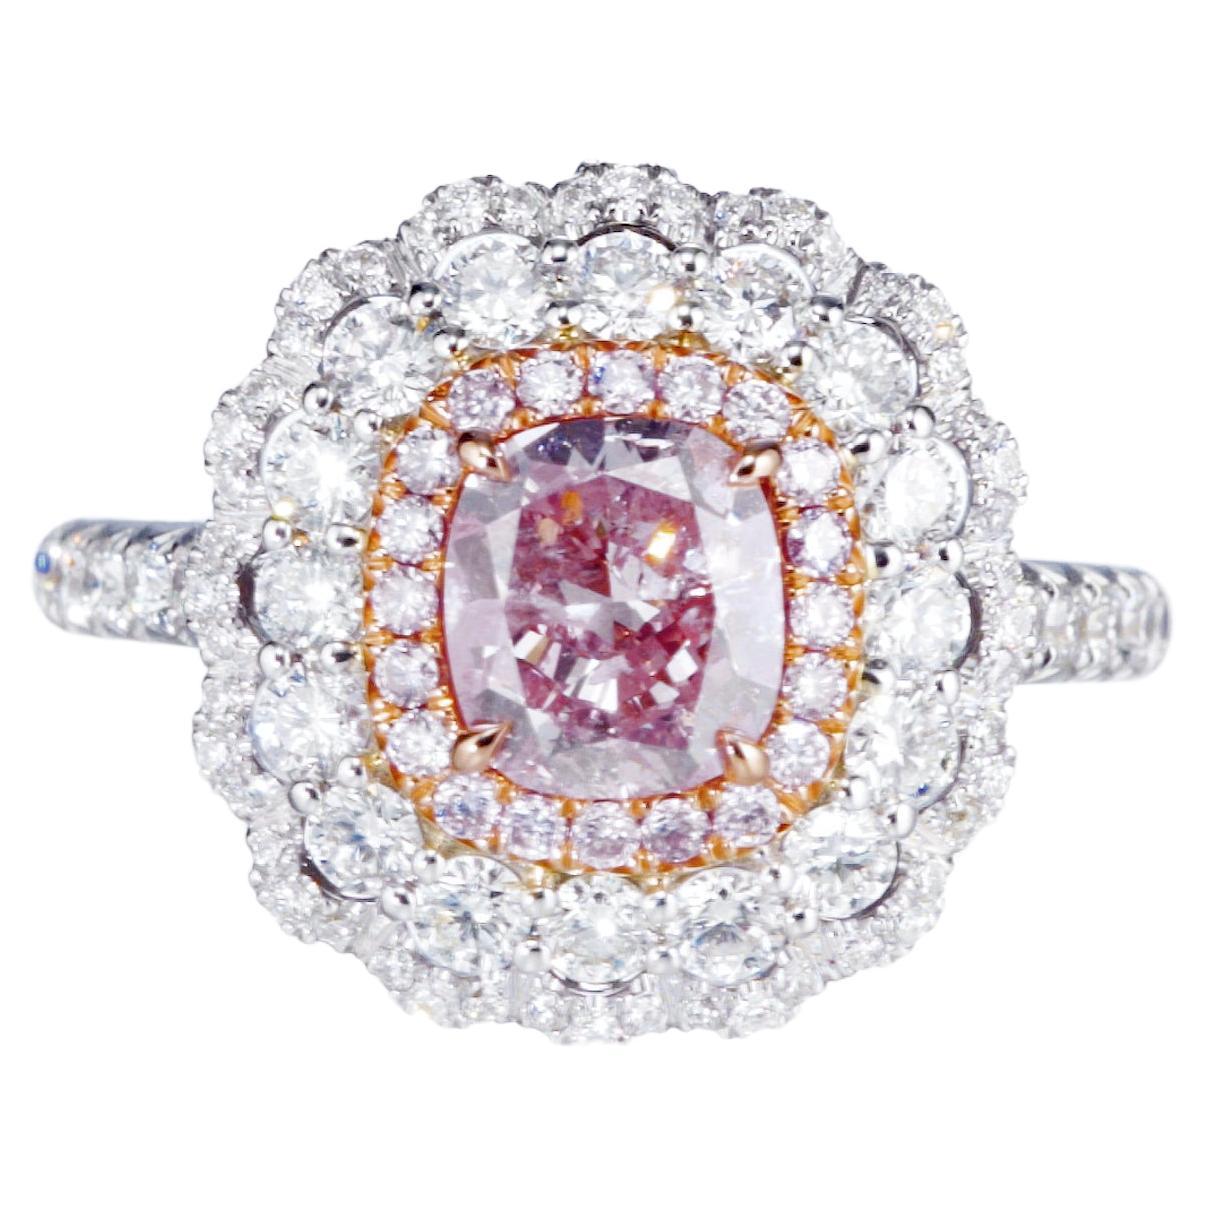 GIA Certified, 1.04ct Natural Fancy Pink Cushion shape Diamond Ring in 18KT Gold